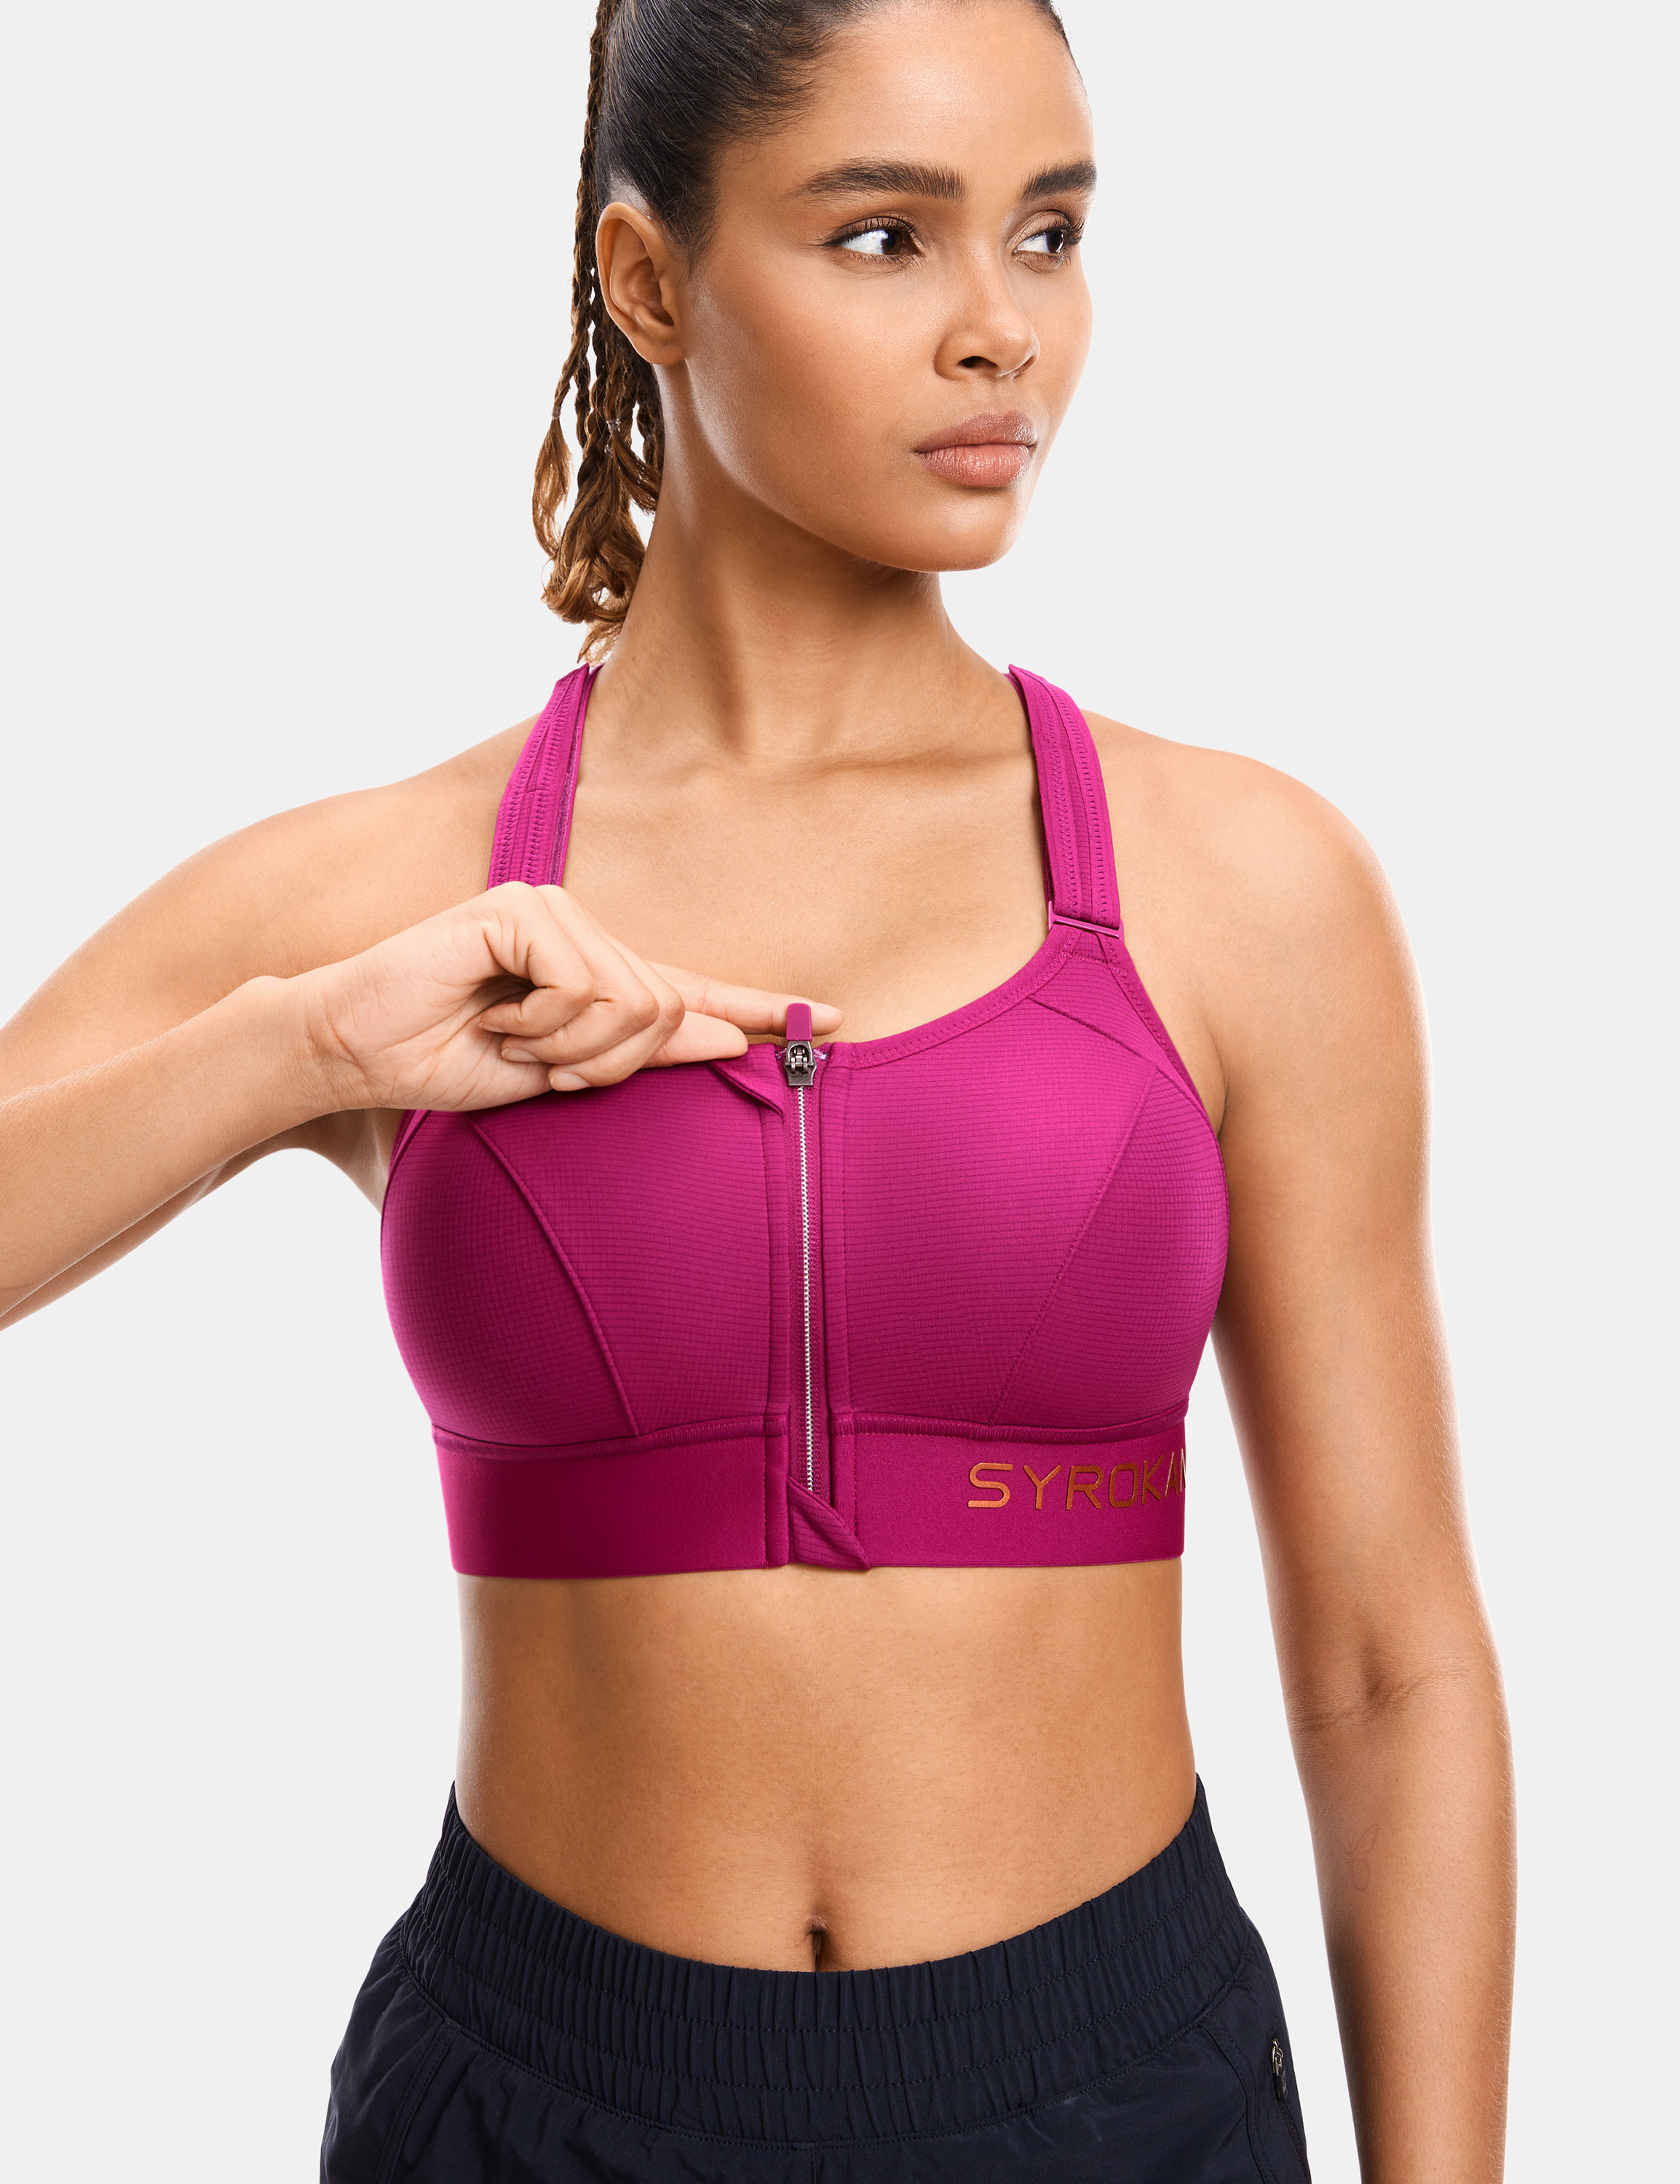 SYROKAN Womens' Sports Bra High Impact Support Zip Front